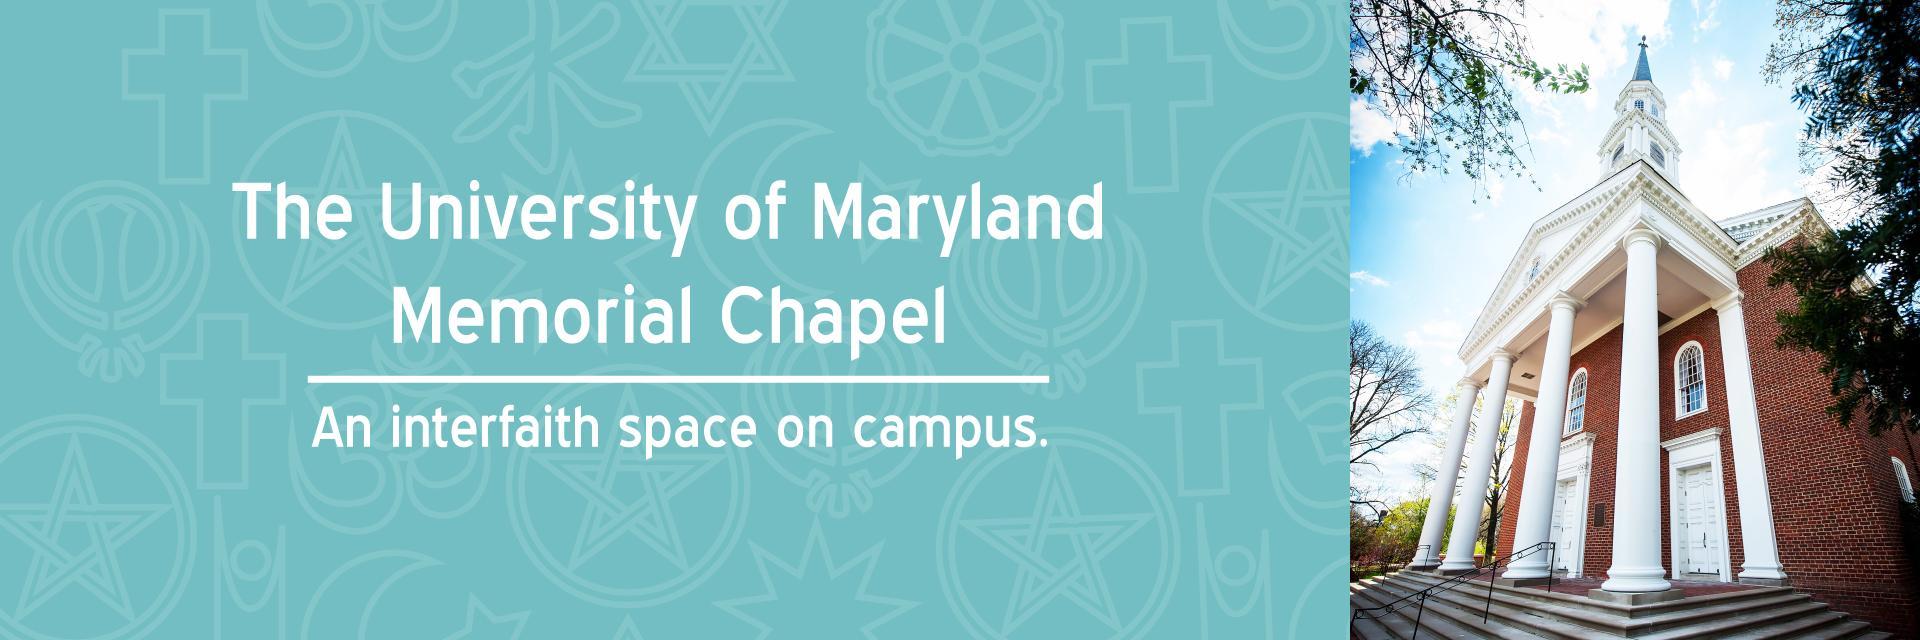 The university of maryland memorial chapel an interfaith space on campus